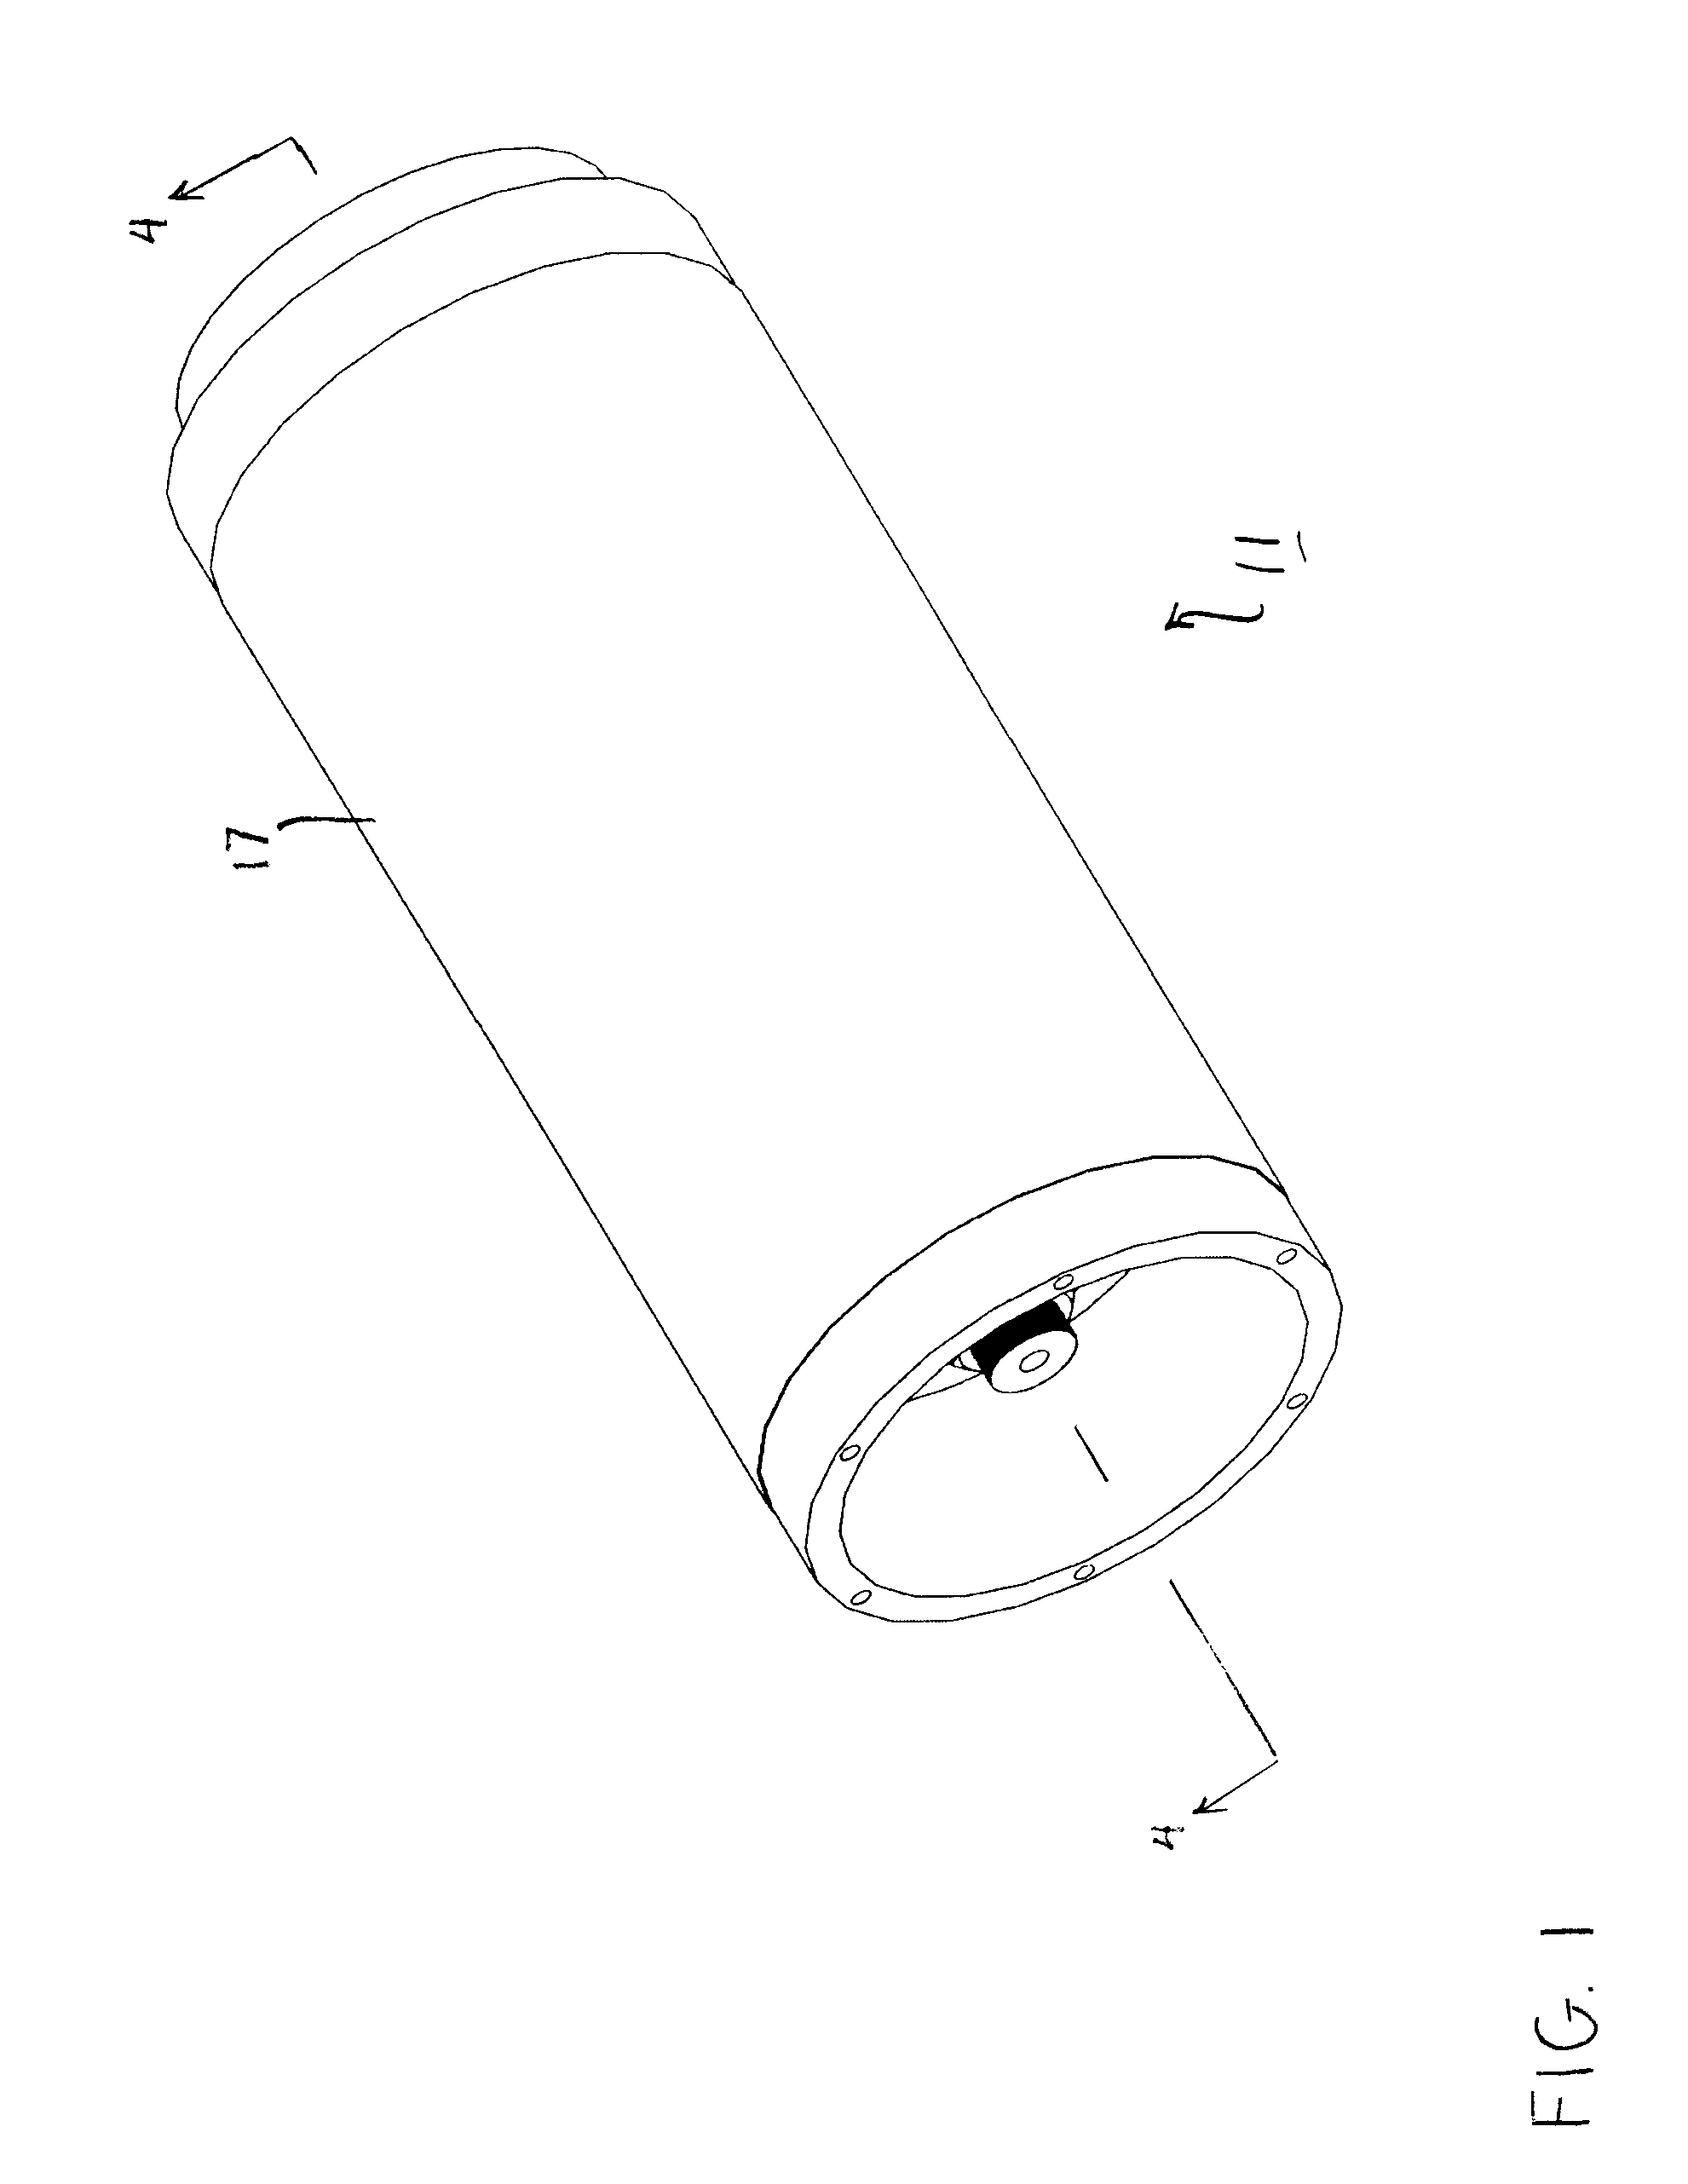 Fluid bearing assembly